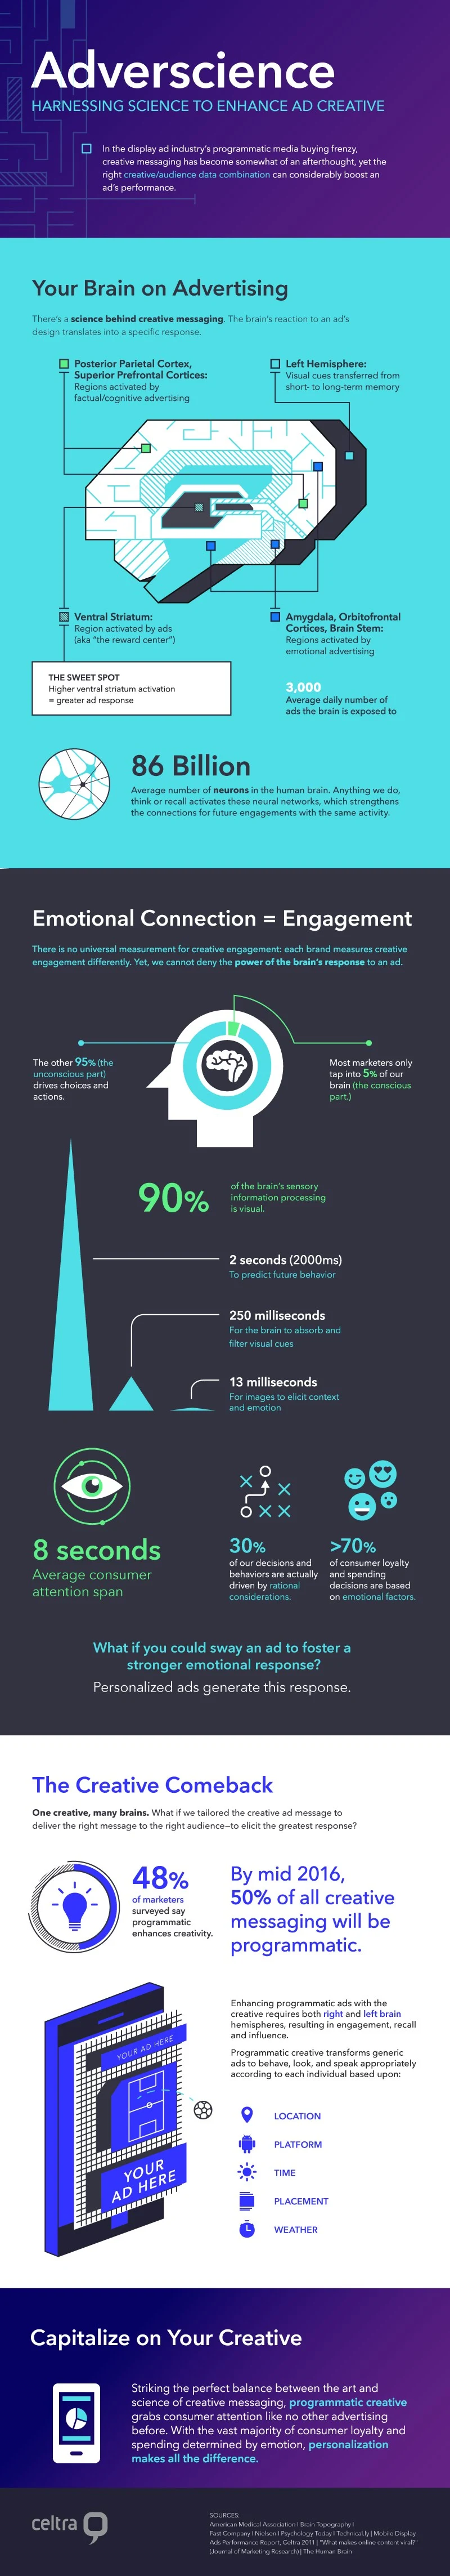 Adverscience - Harnessing Science to Enhance Ad Creative - #infographic